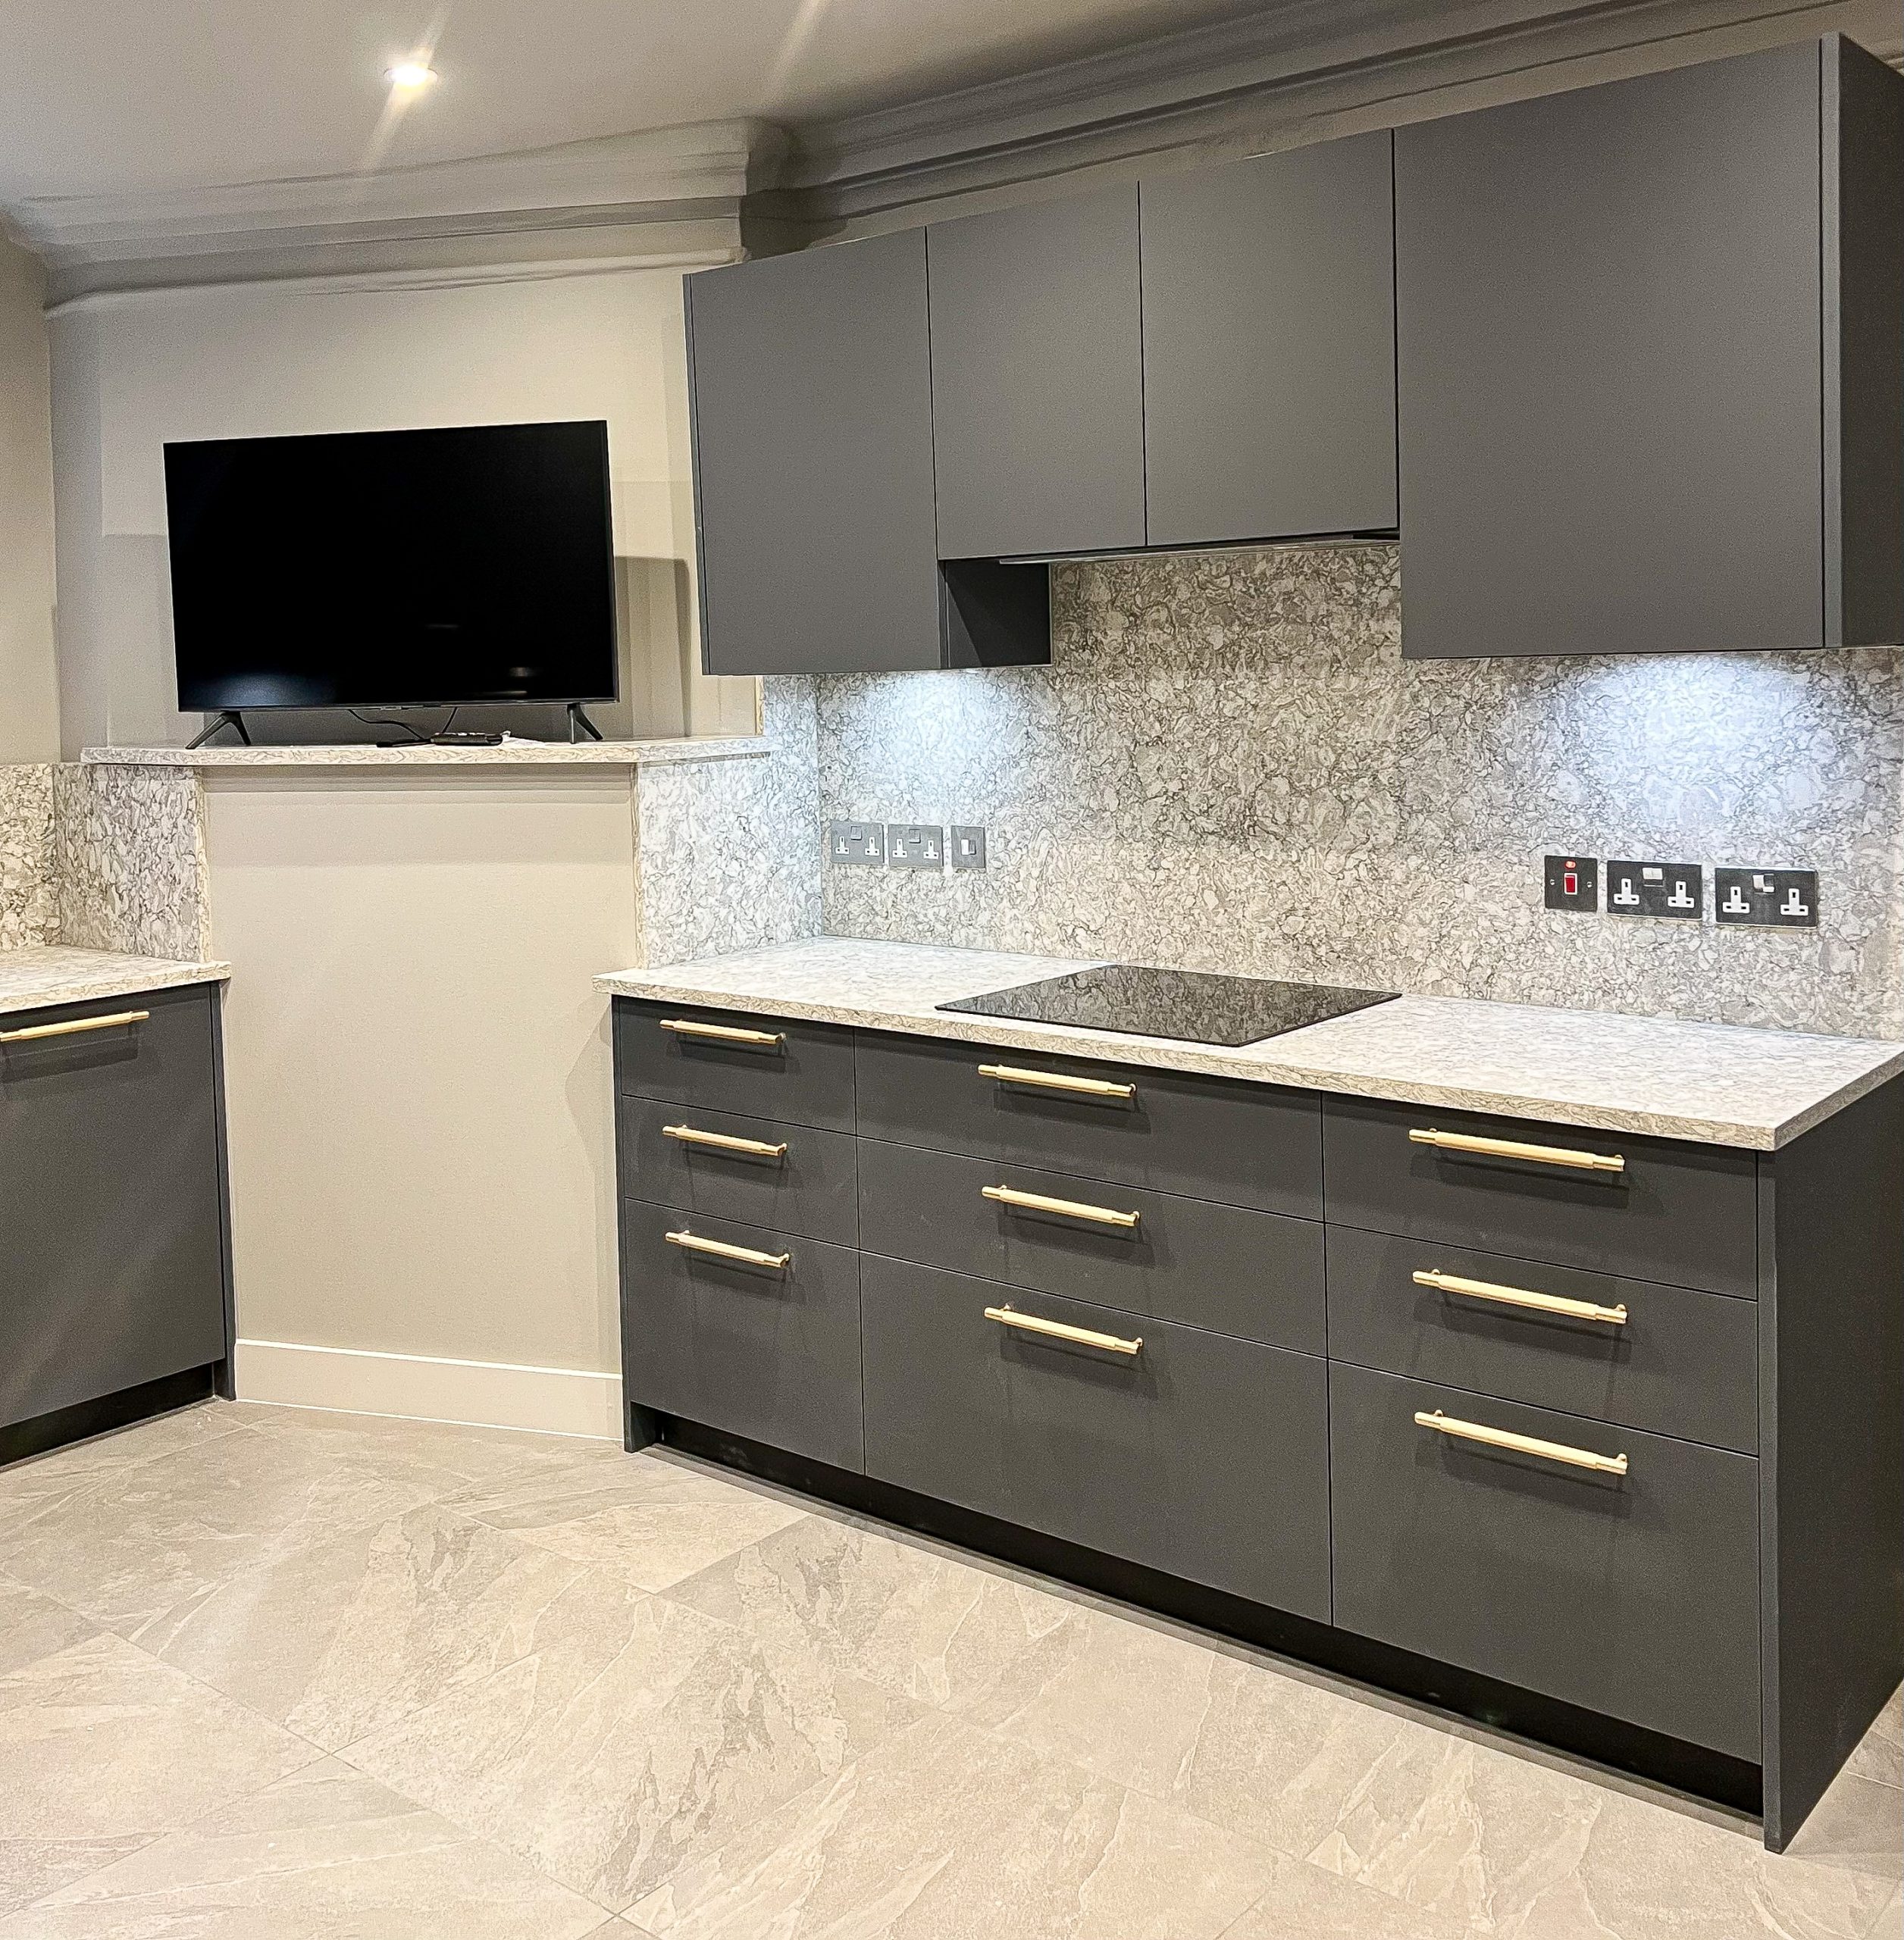 A modern kitchen with gray cabinetry, marble countertops, and a mounted television.